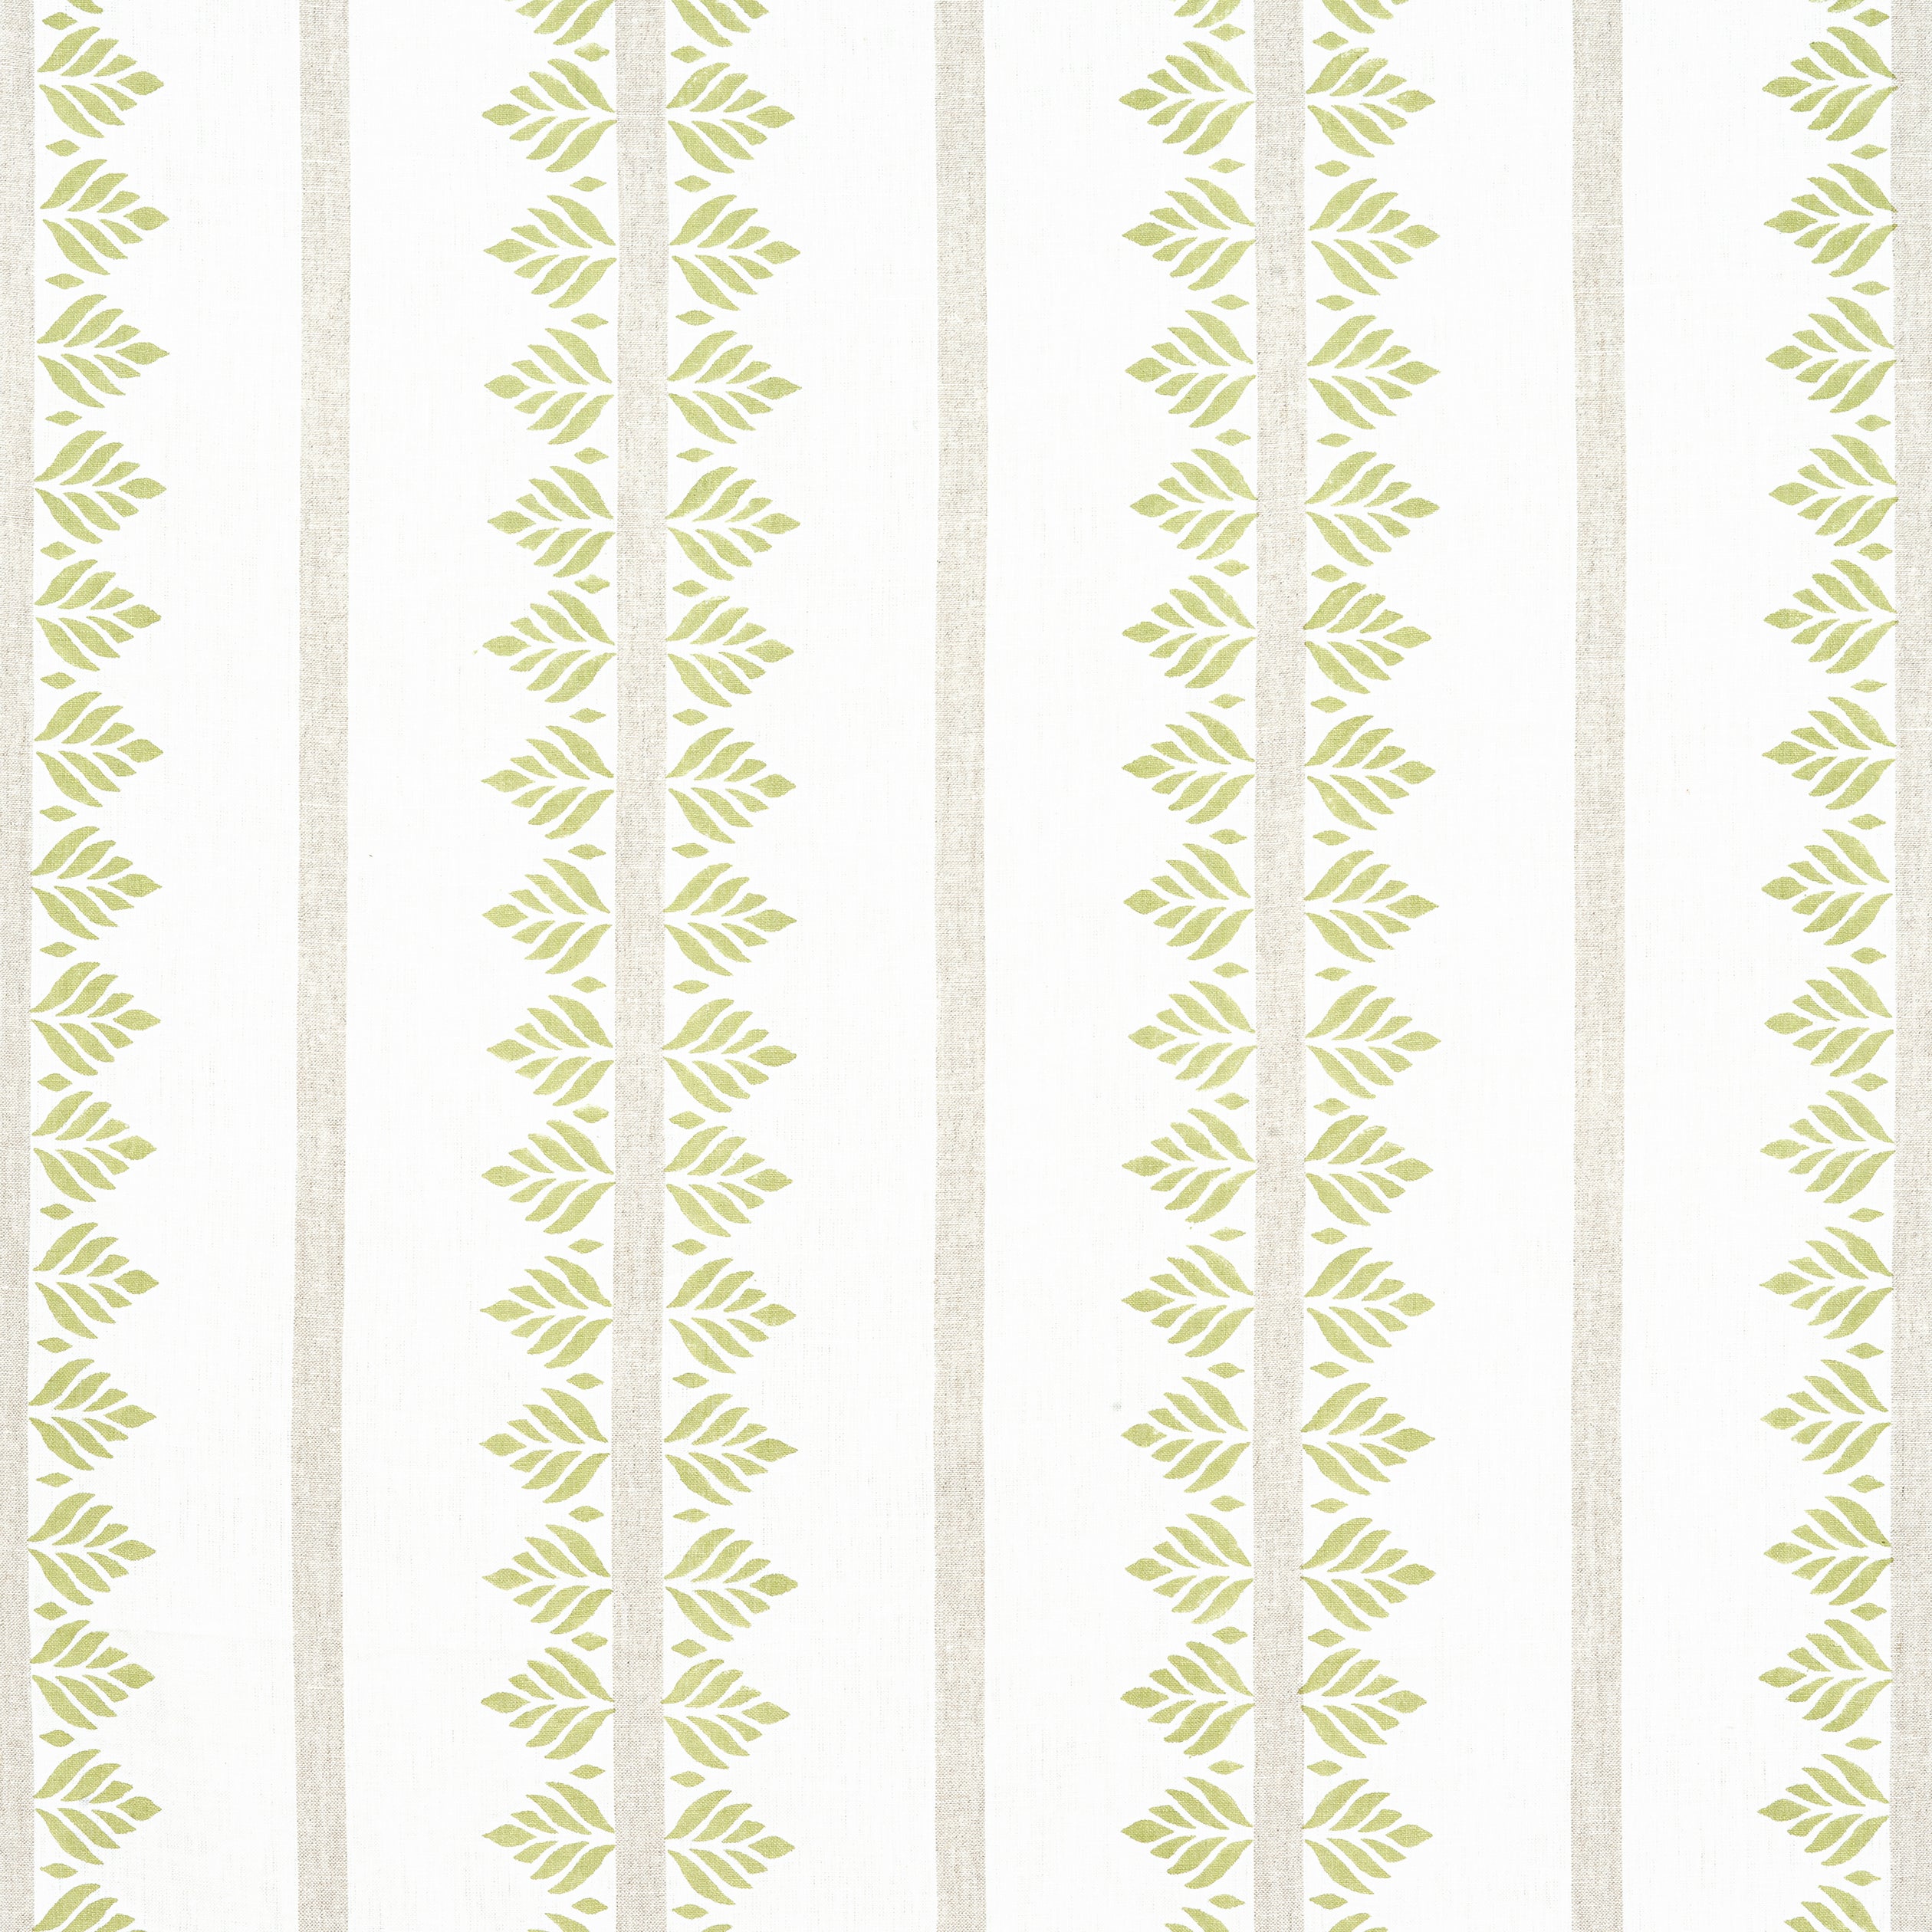 Fern Stripe fabric in green color - pattern number AF15102 - by Anna French in the Antilles collection